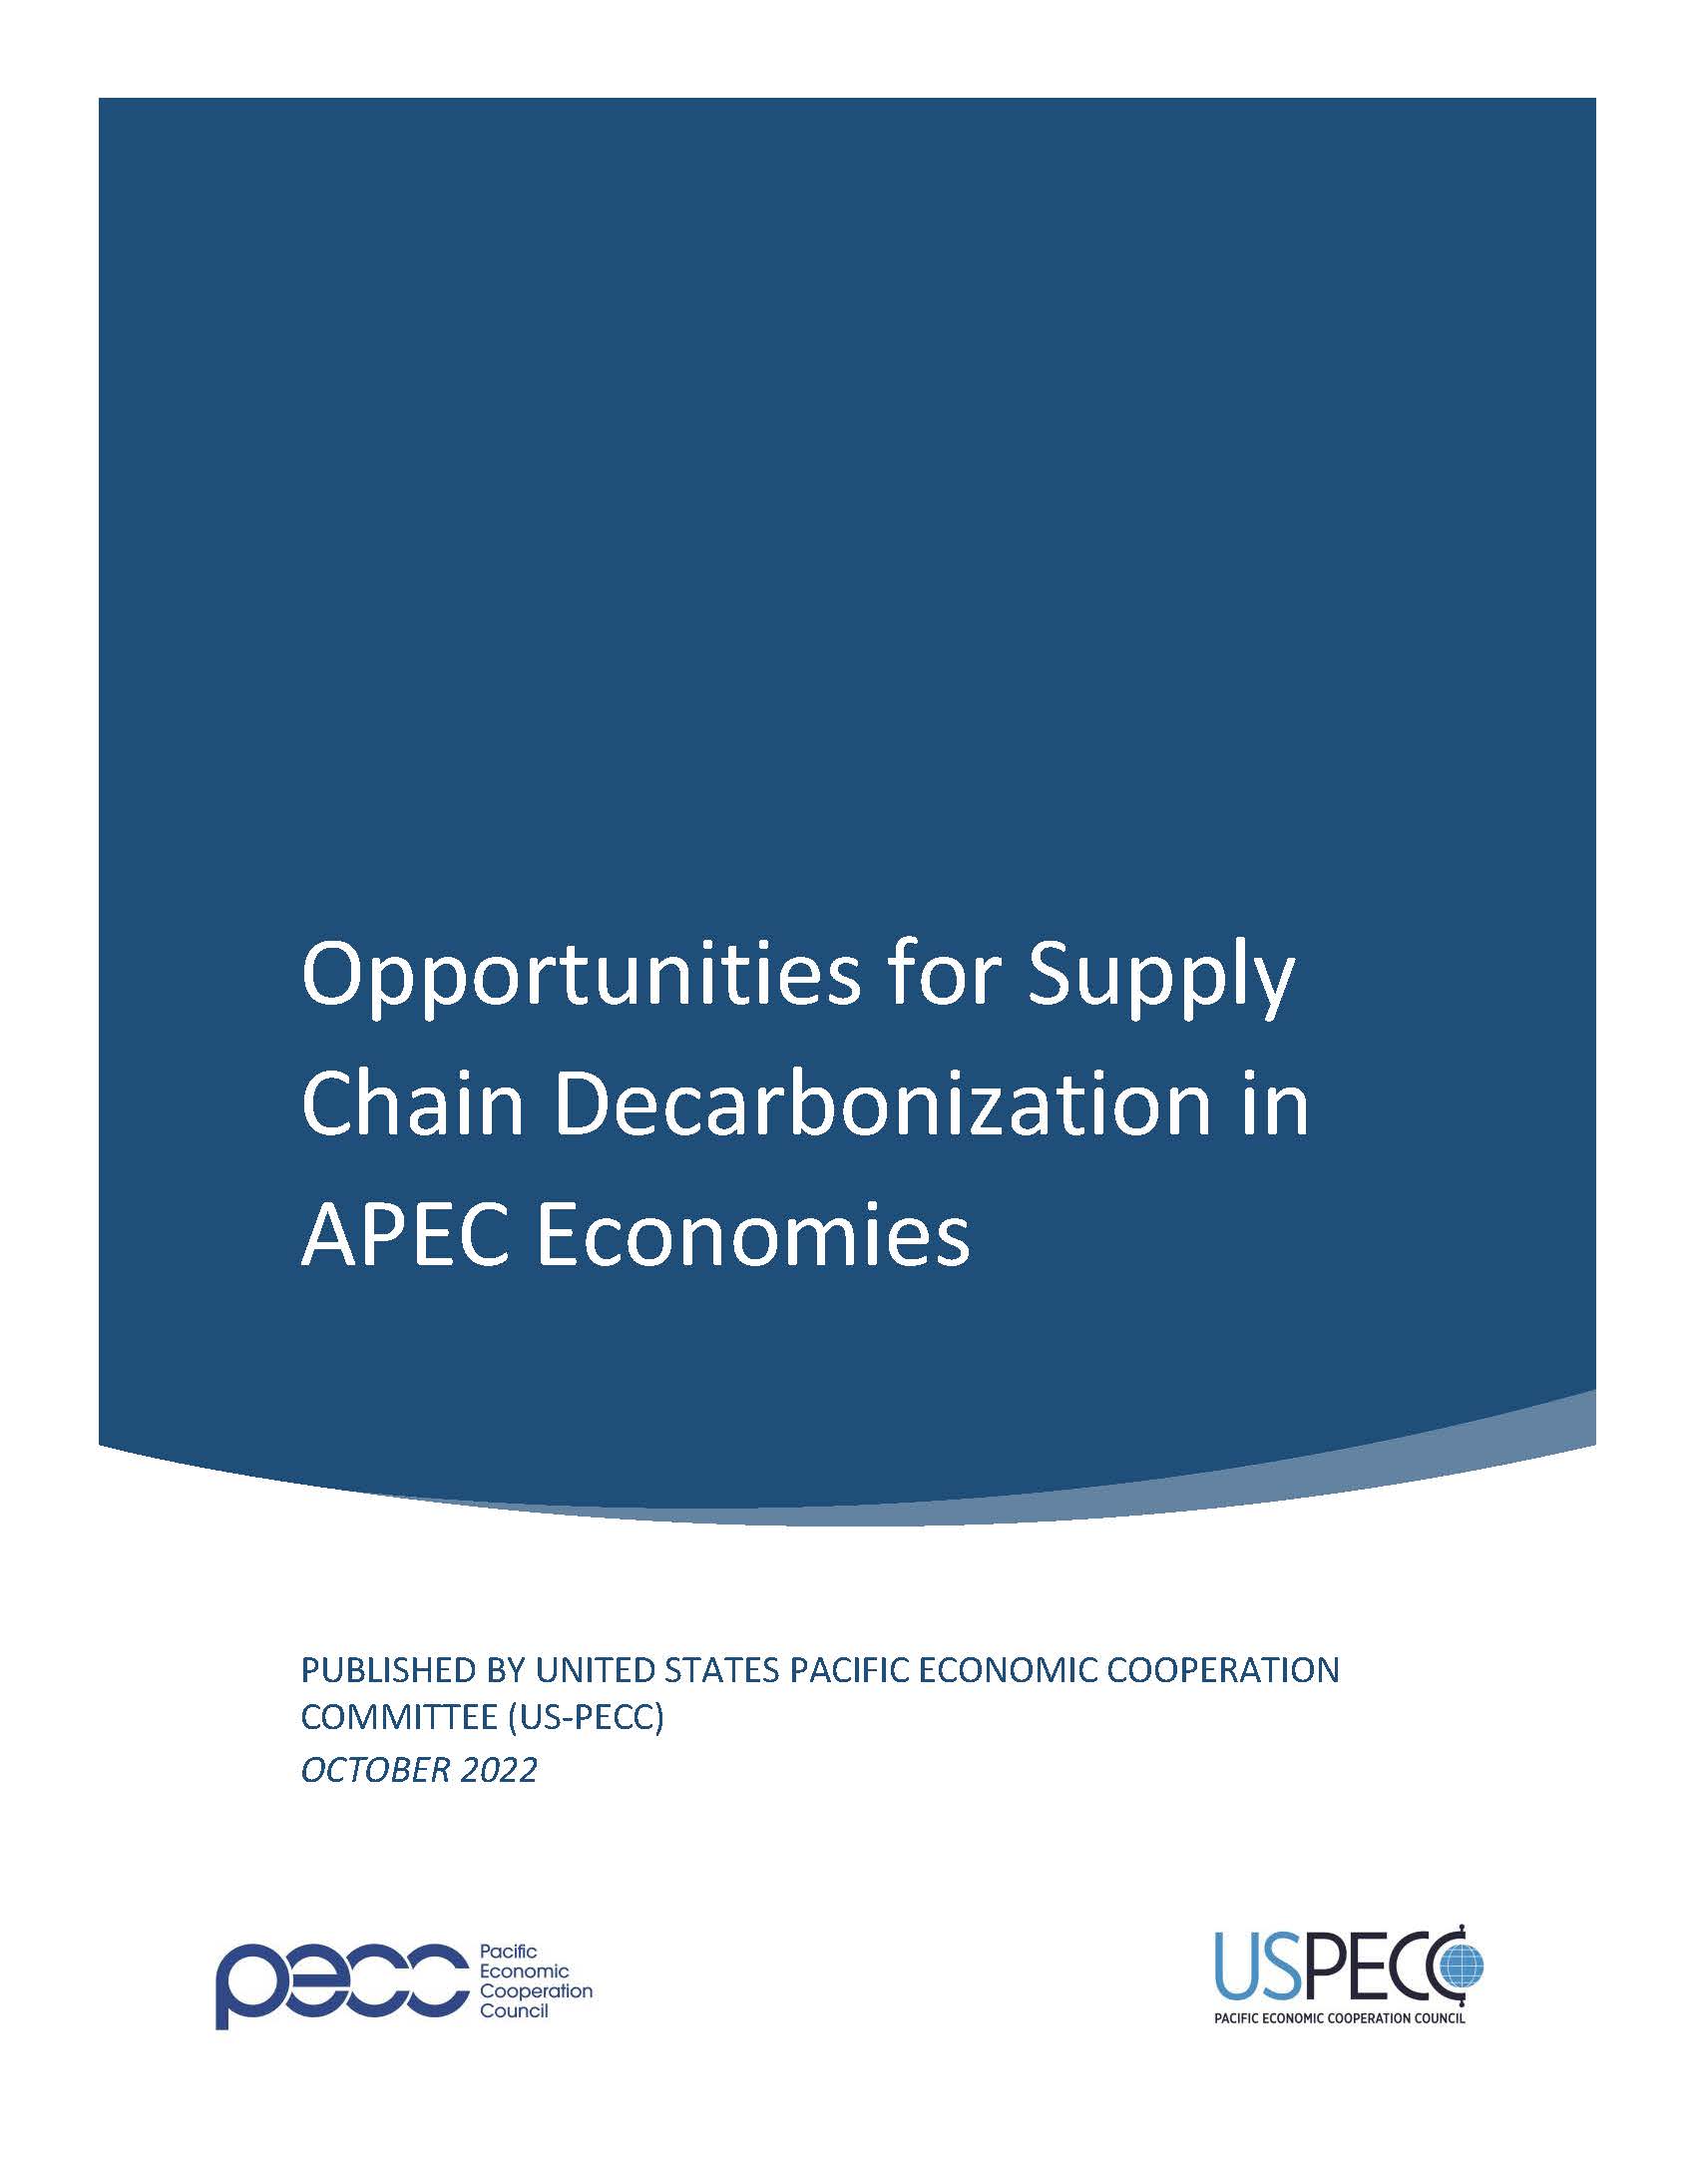 Opportunities for Supply Chain Decarbonization in APEC Economies